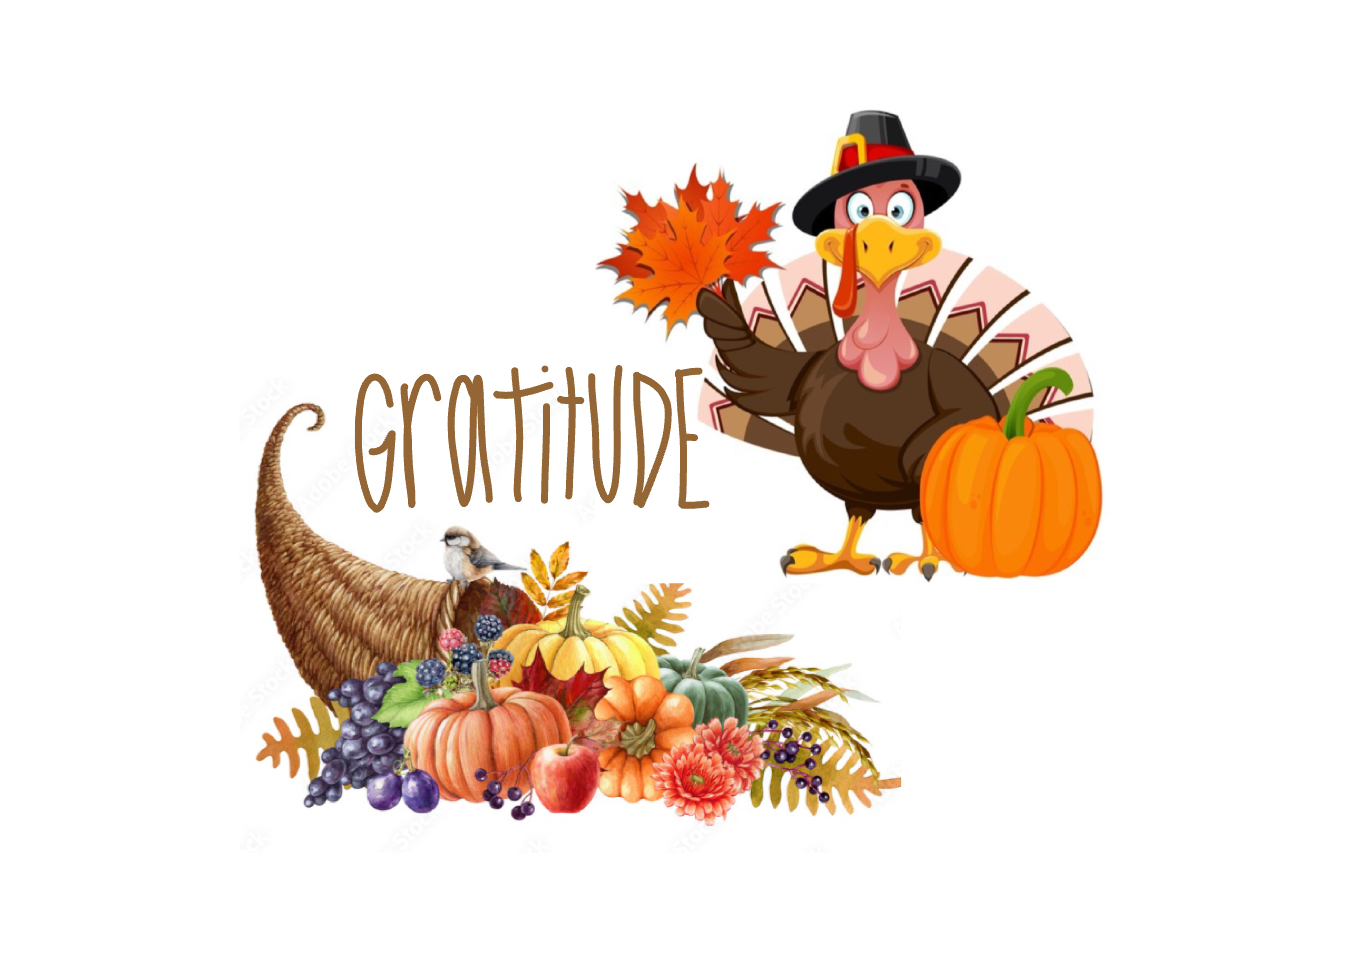 AHN students are especially grateful for the blessings they are given this Thanksgiving.